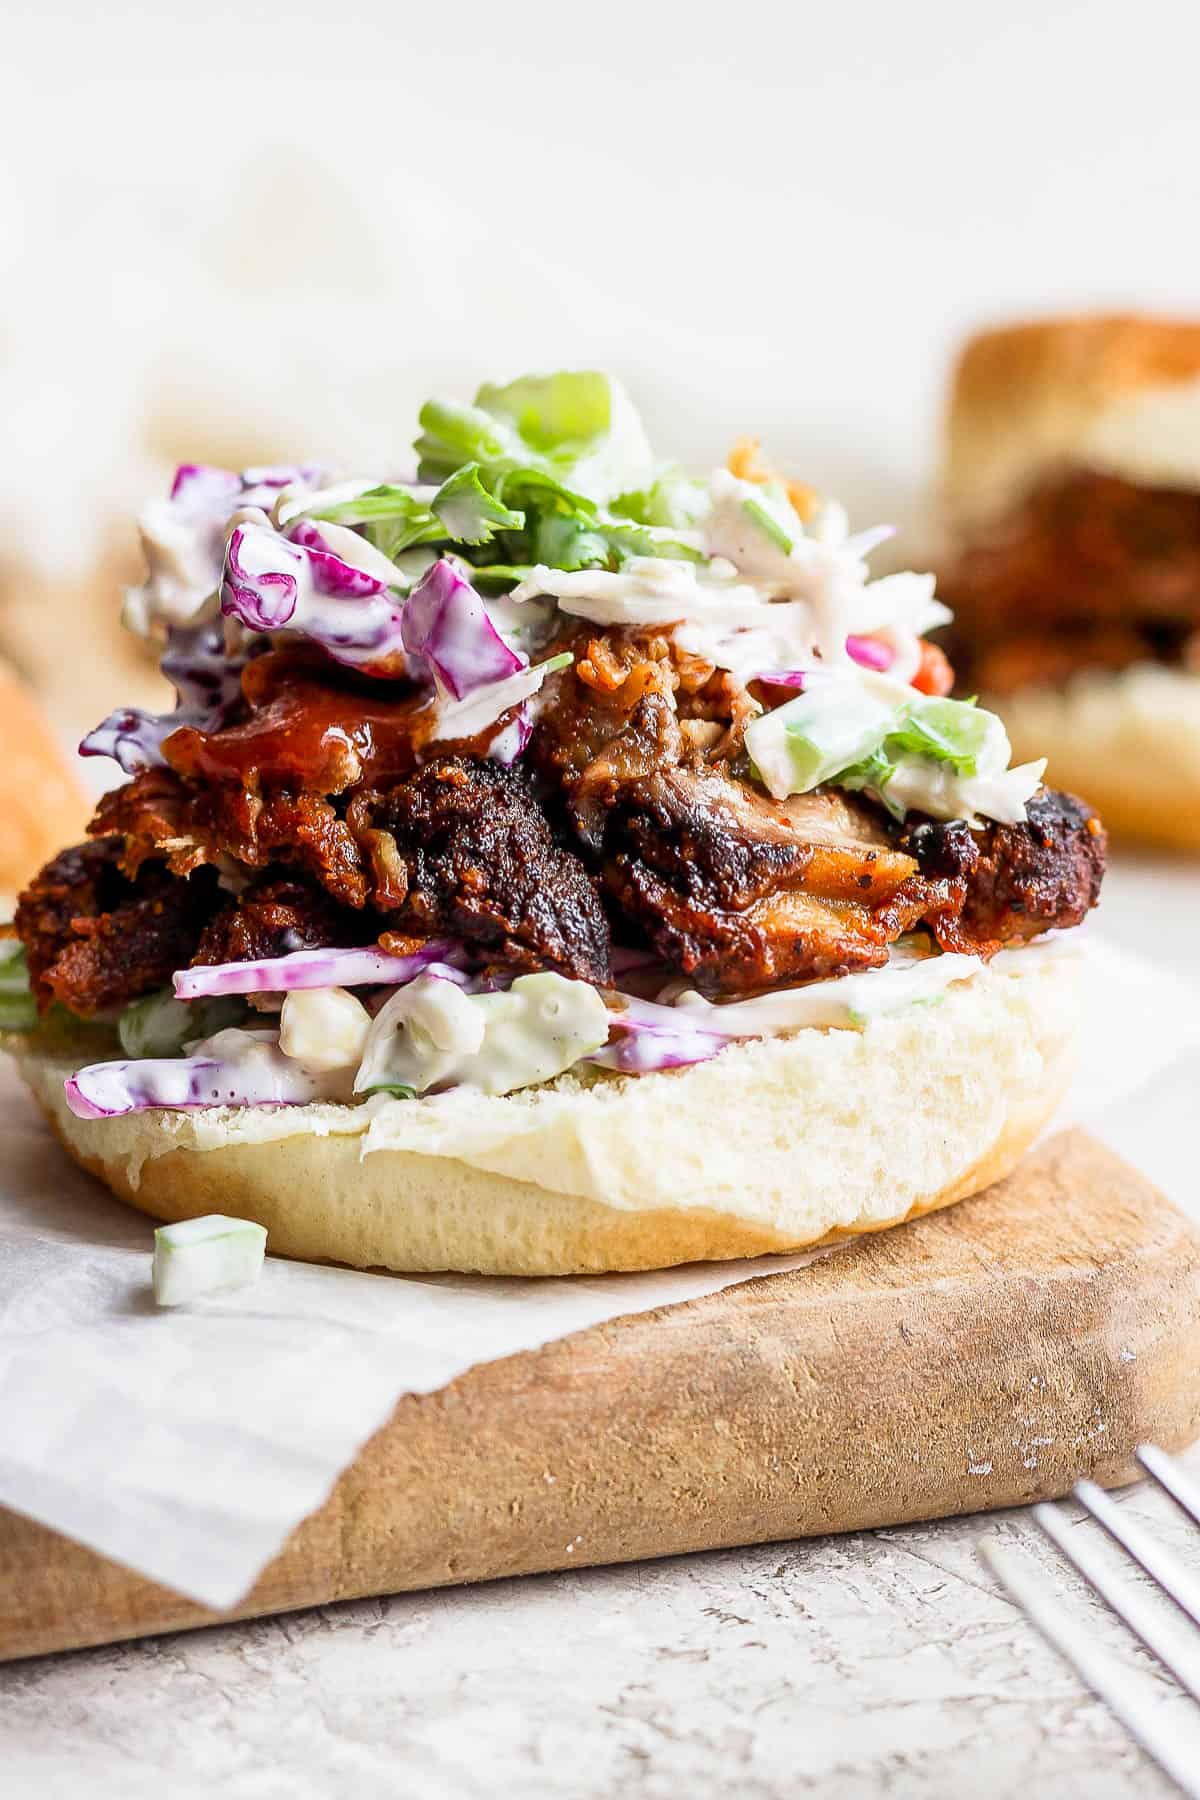 The bottom bun topped with pulled pork, bbq sauce, and coleslaw.